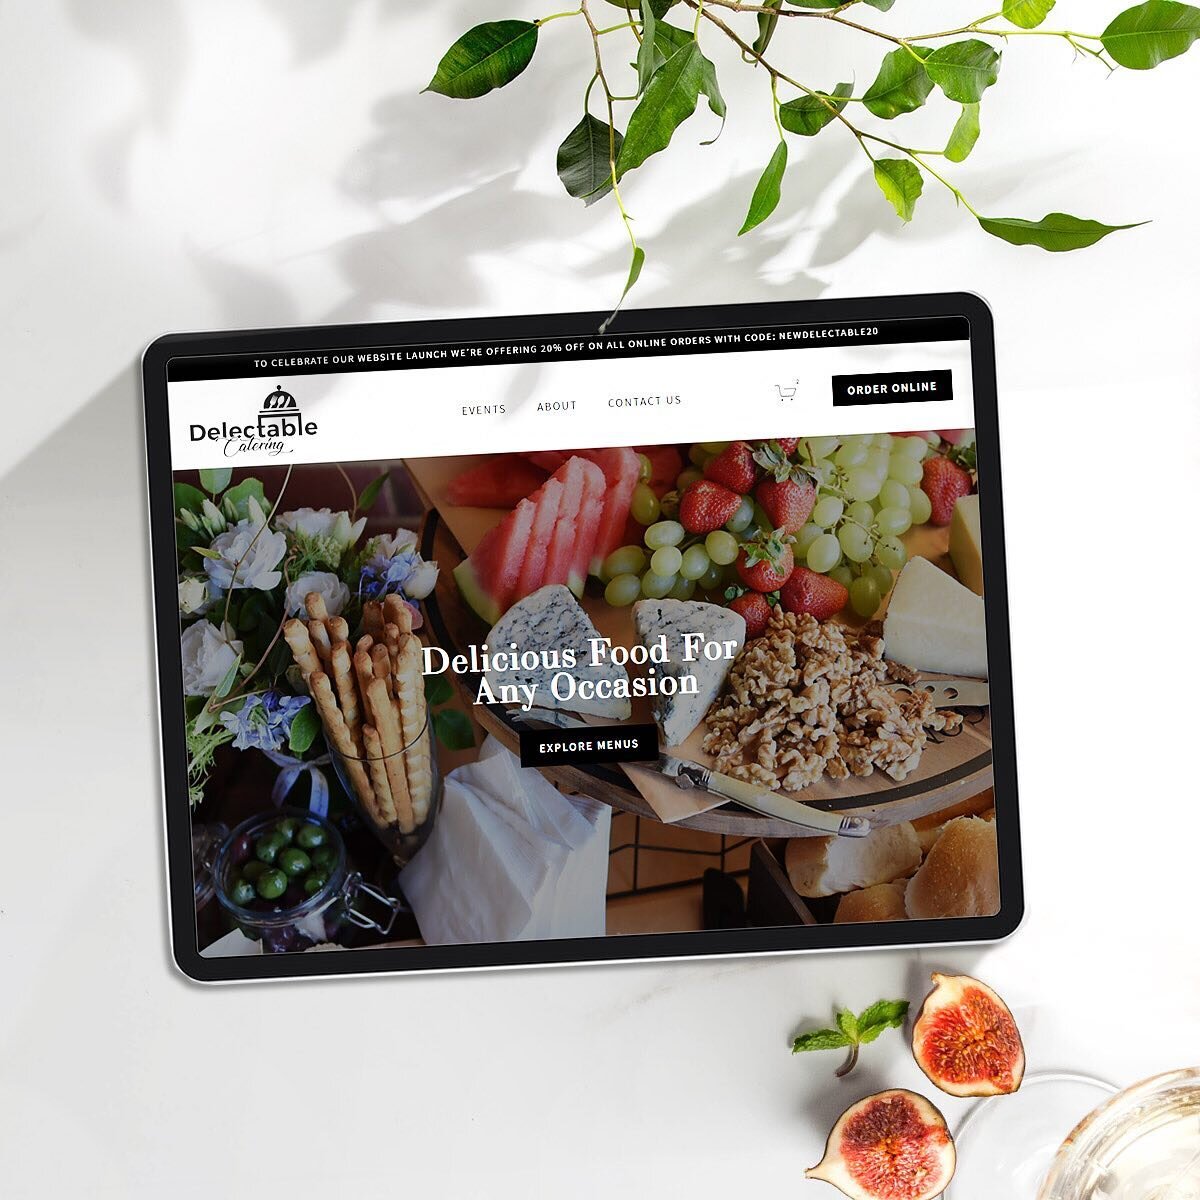 NEW IN PORTFOLIO - Delectable Catering website and online store
www.delectablecatering.com.au 
.
Thank you Louisa for being the client that any designer would love to have. Working with you has been amazing!